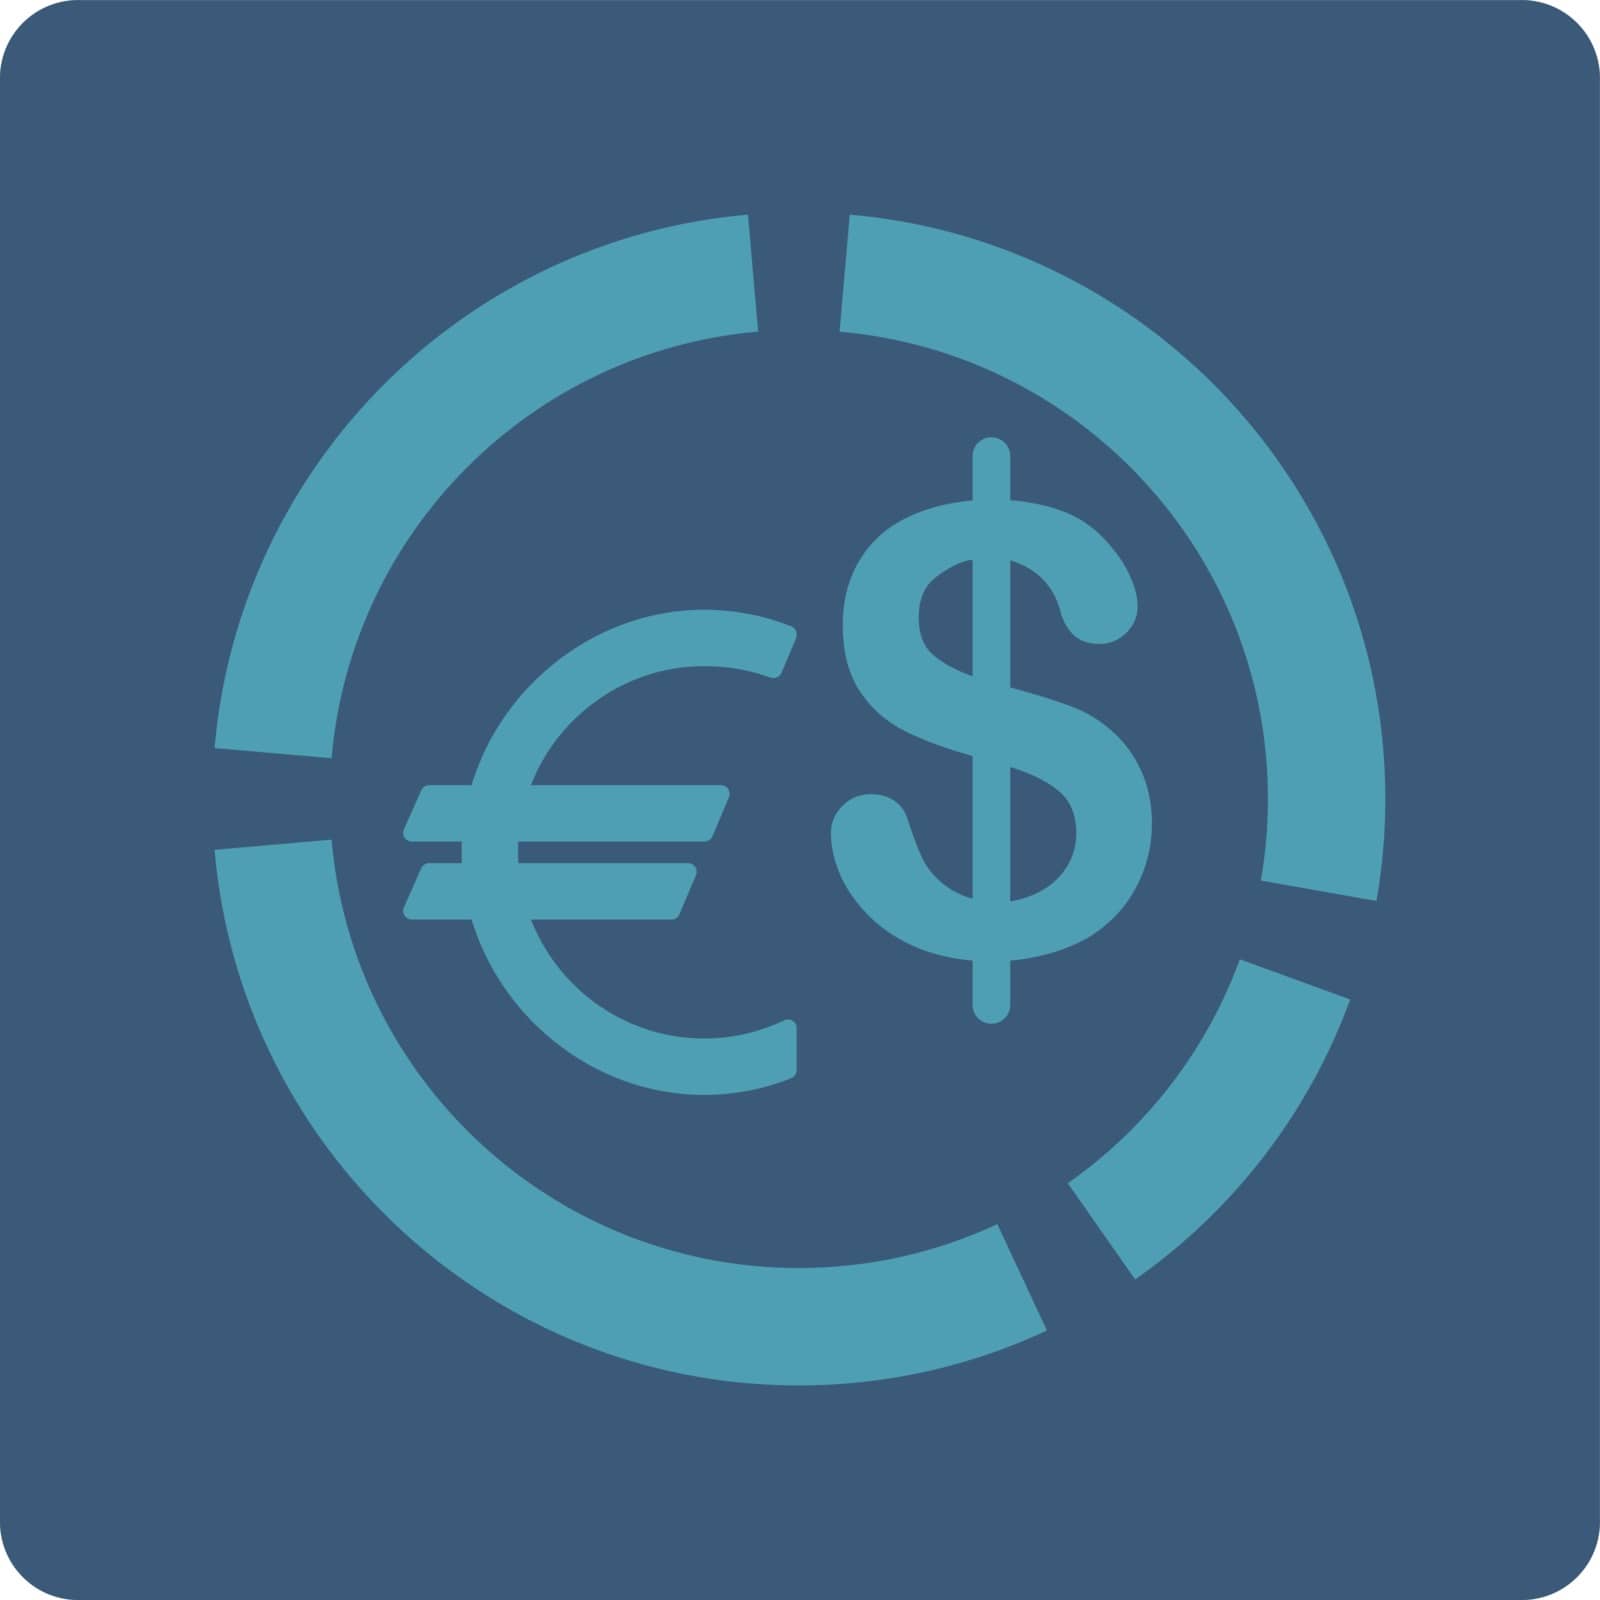 Currency Diagram vector icon. This flat rounded square button uses cyan and blue colors and isolated on a white background.